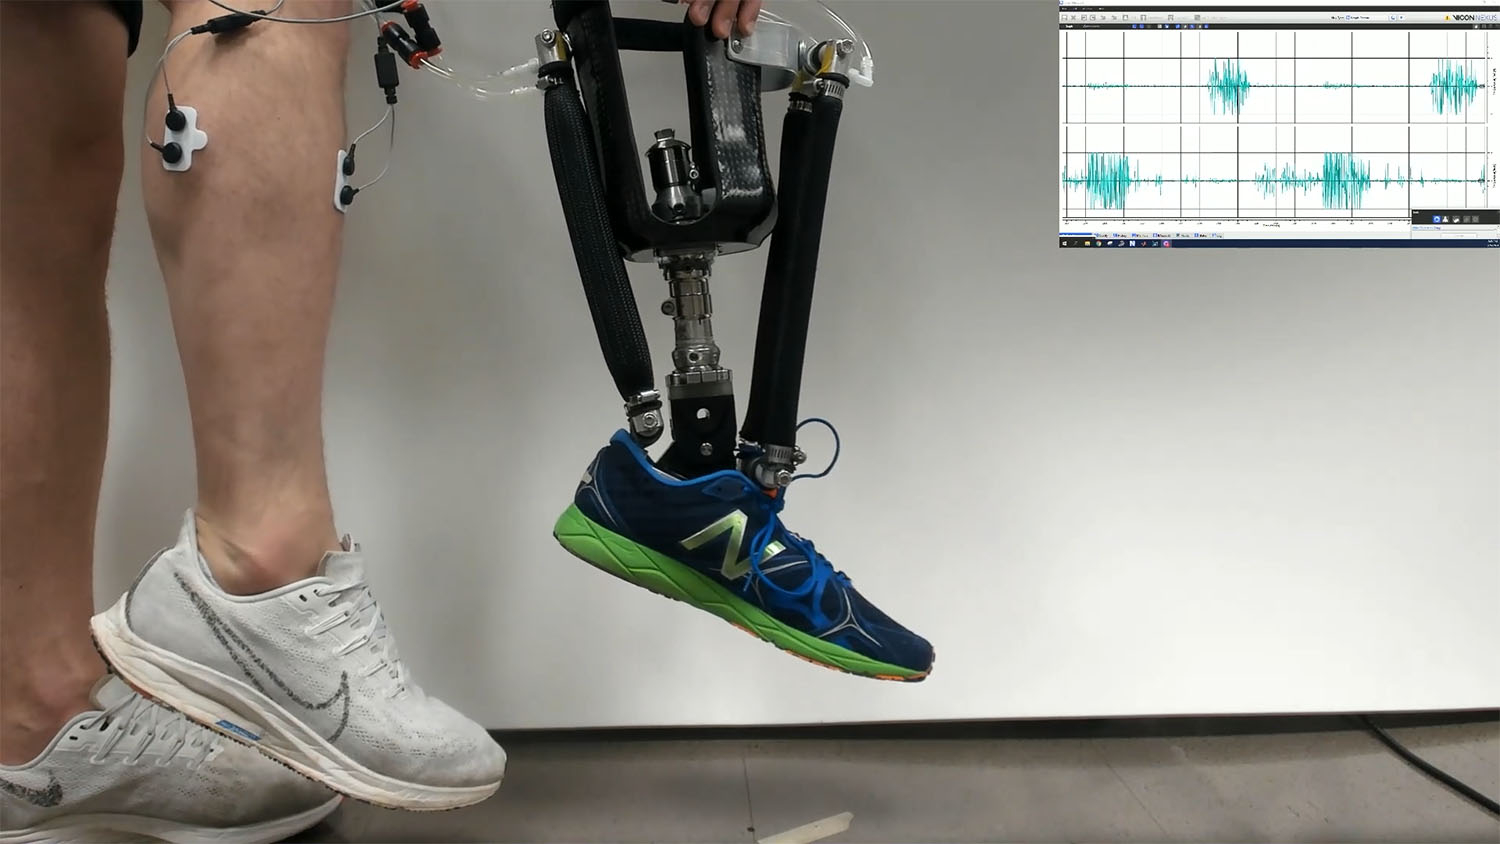 on left part of image, a man's lower leg is shown, with the toes of his feet pointing down. There are sensors attached to his knee and calf. On the right, a robotic prosthetic lower leg is shown flexing in a pose identical to the man's leg. In the upper right hand corner, a graph shows an erratic line that moves up and down.